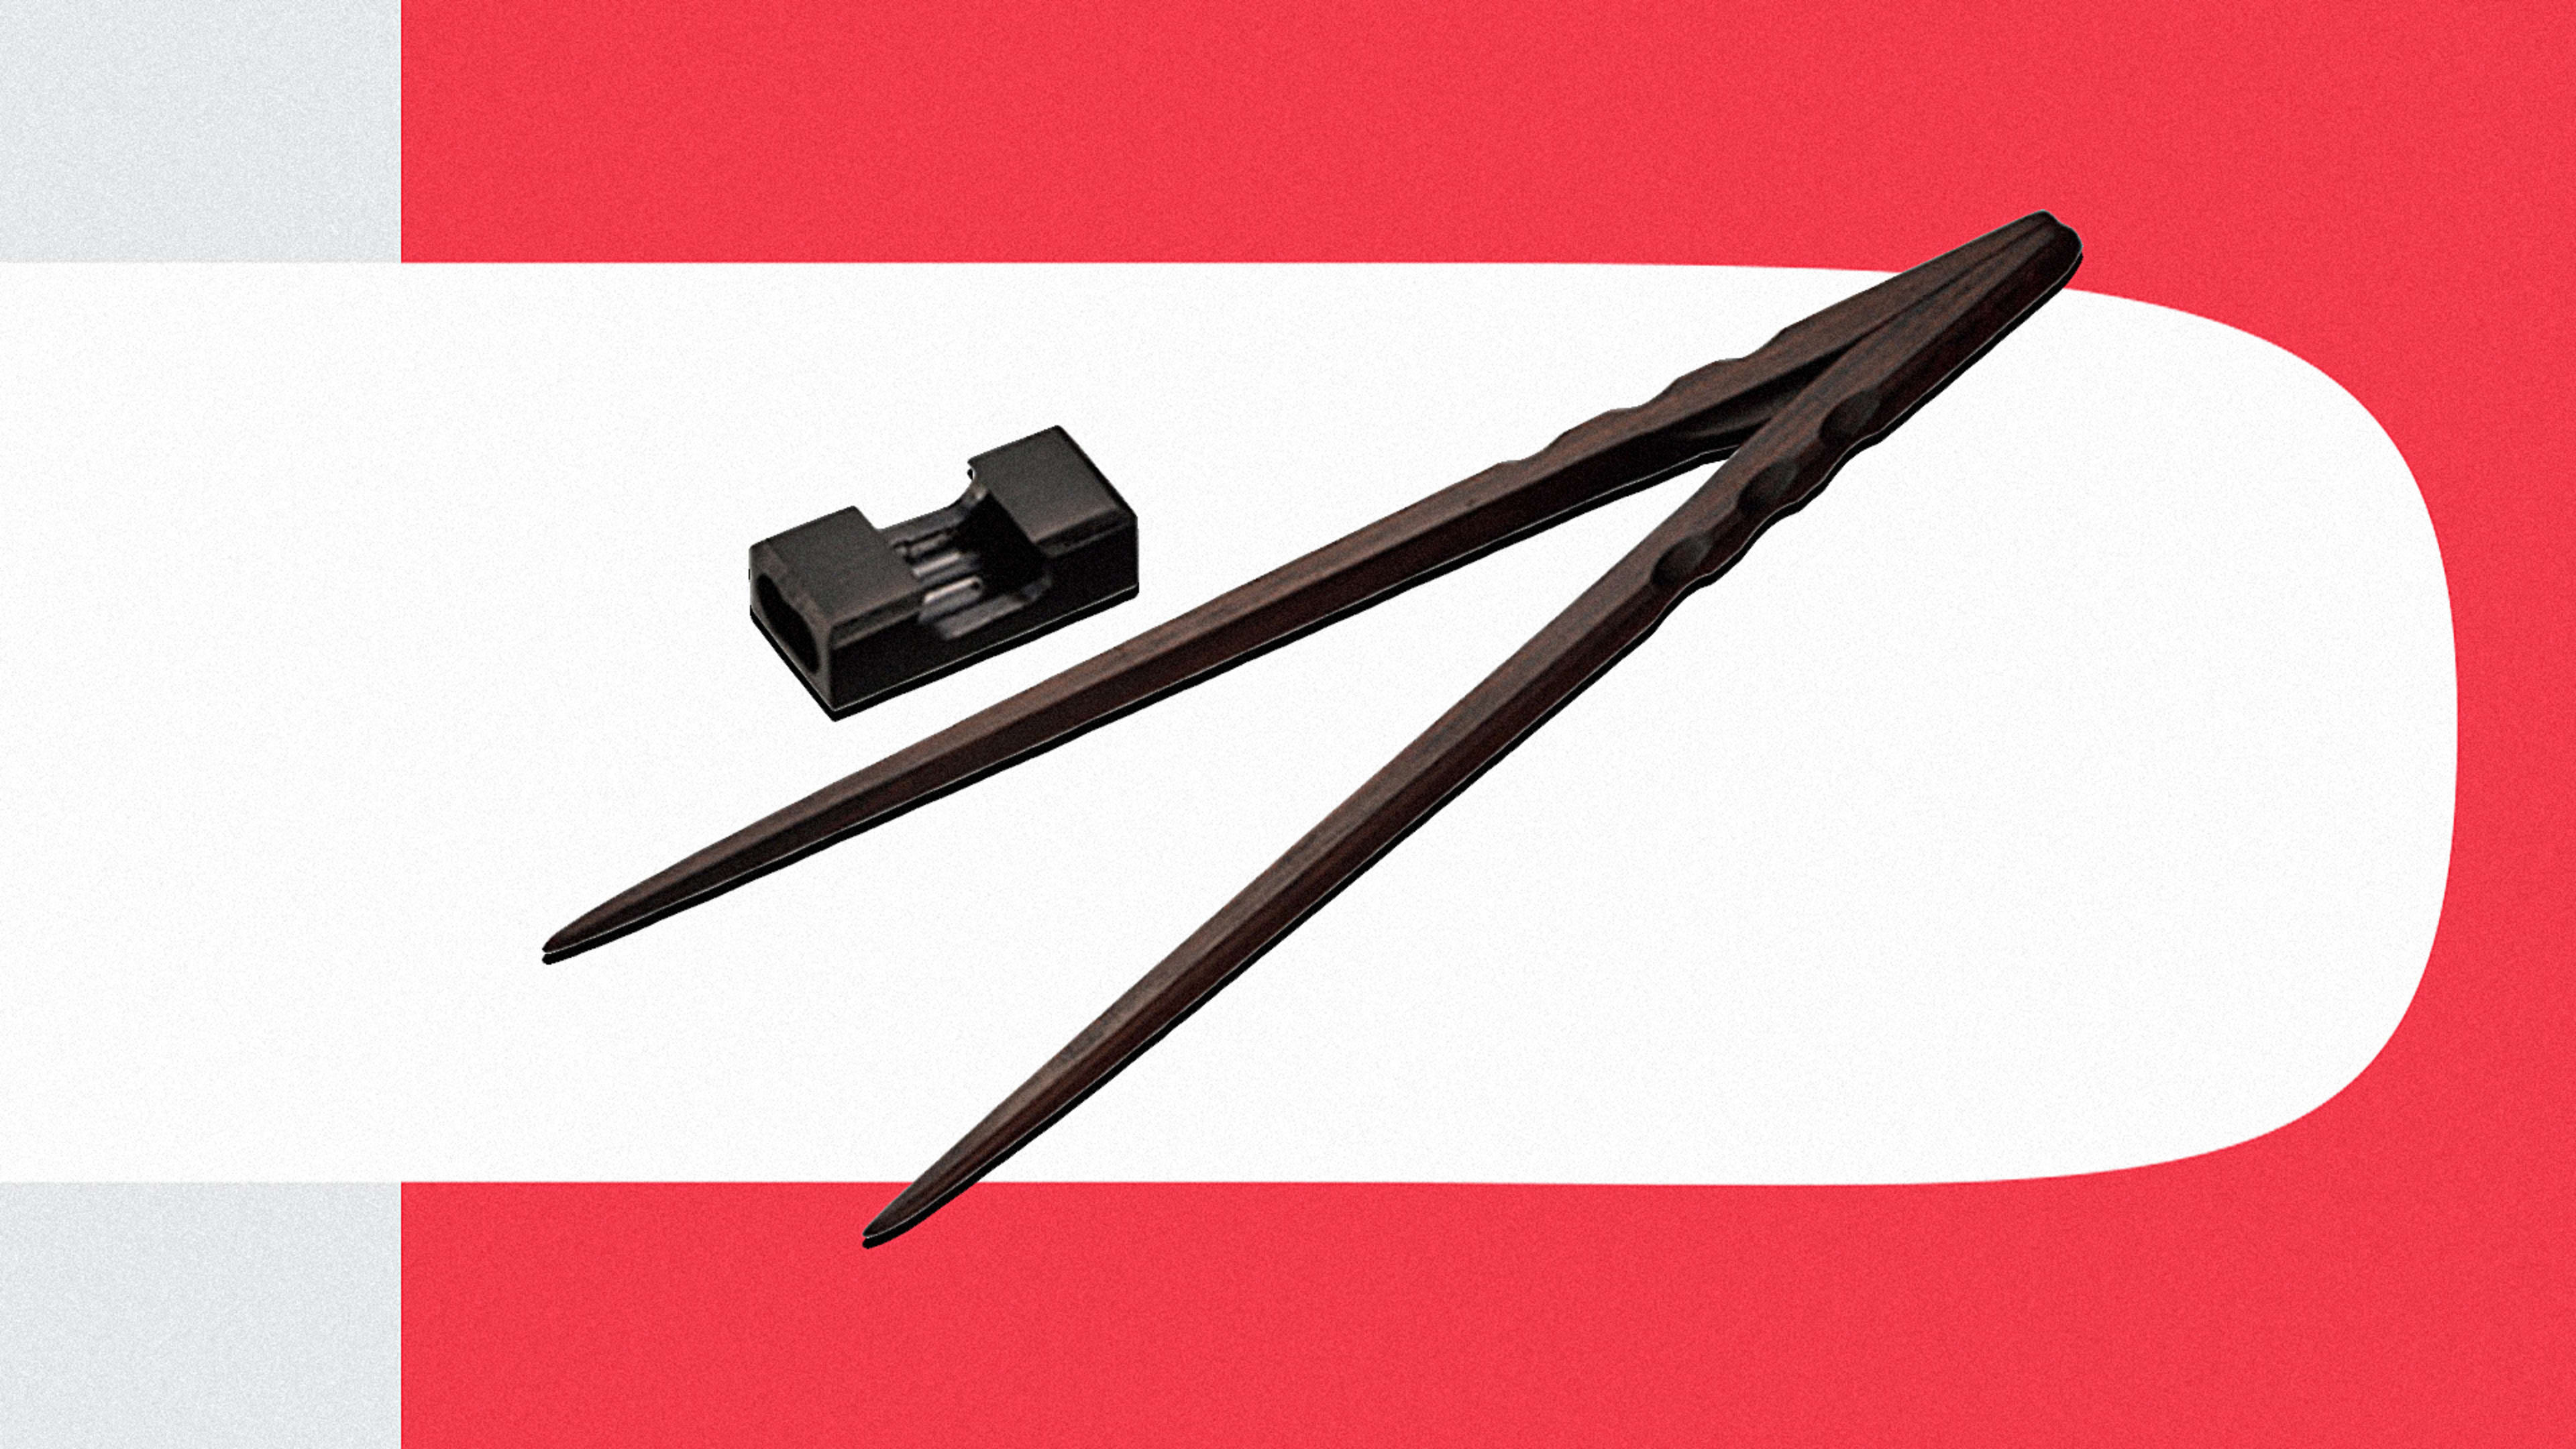 These redesigned chopsticks are simply brilliant